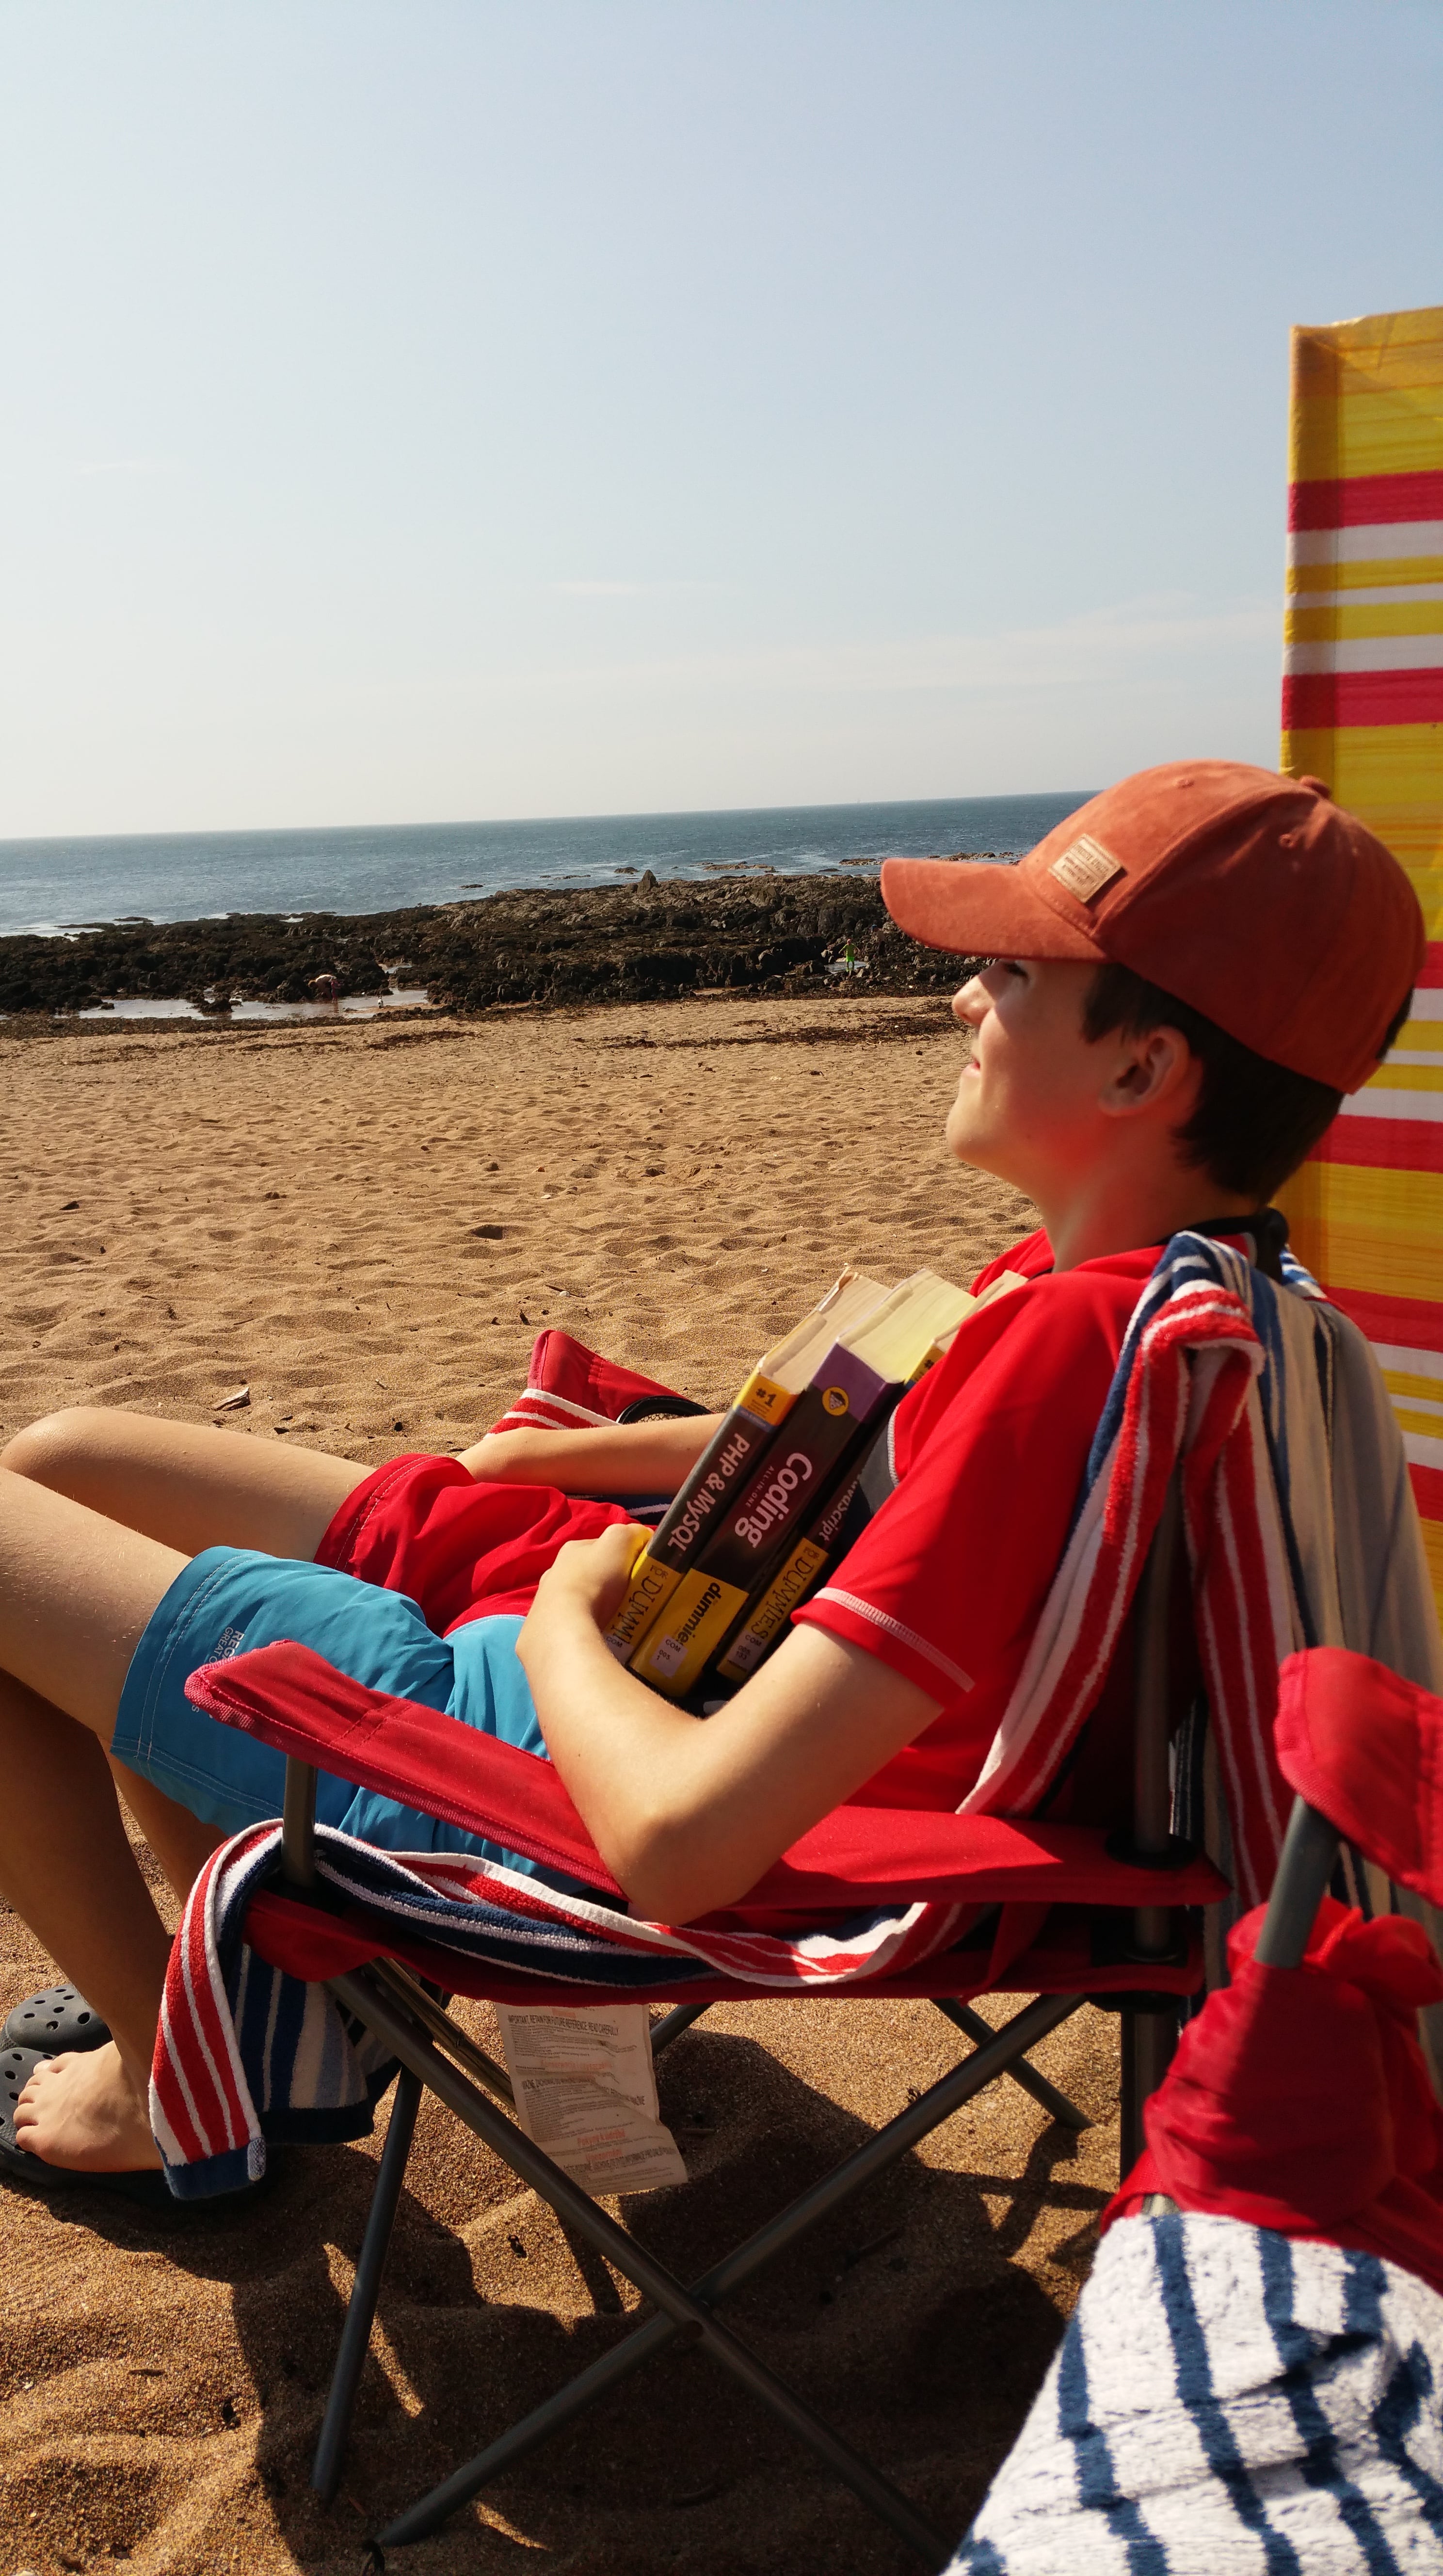 Me with my coding books on a beach in Devon